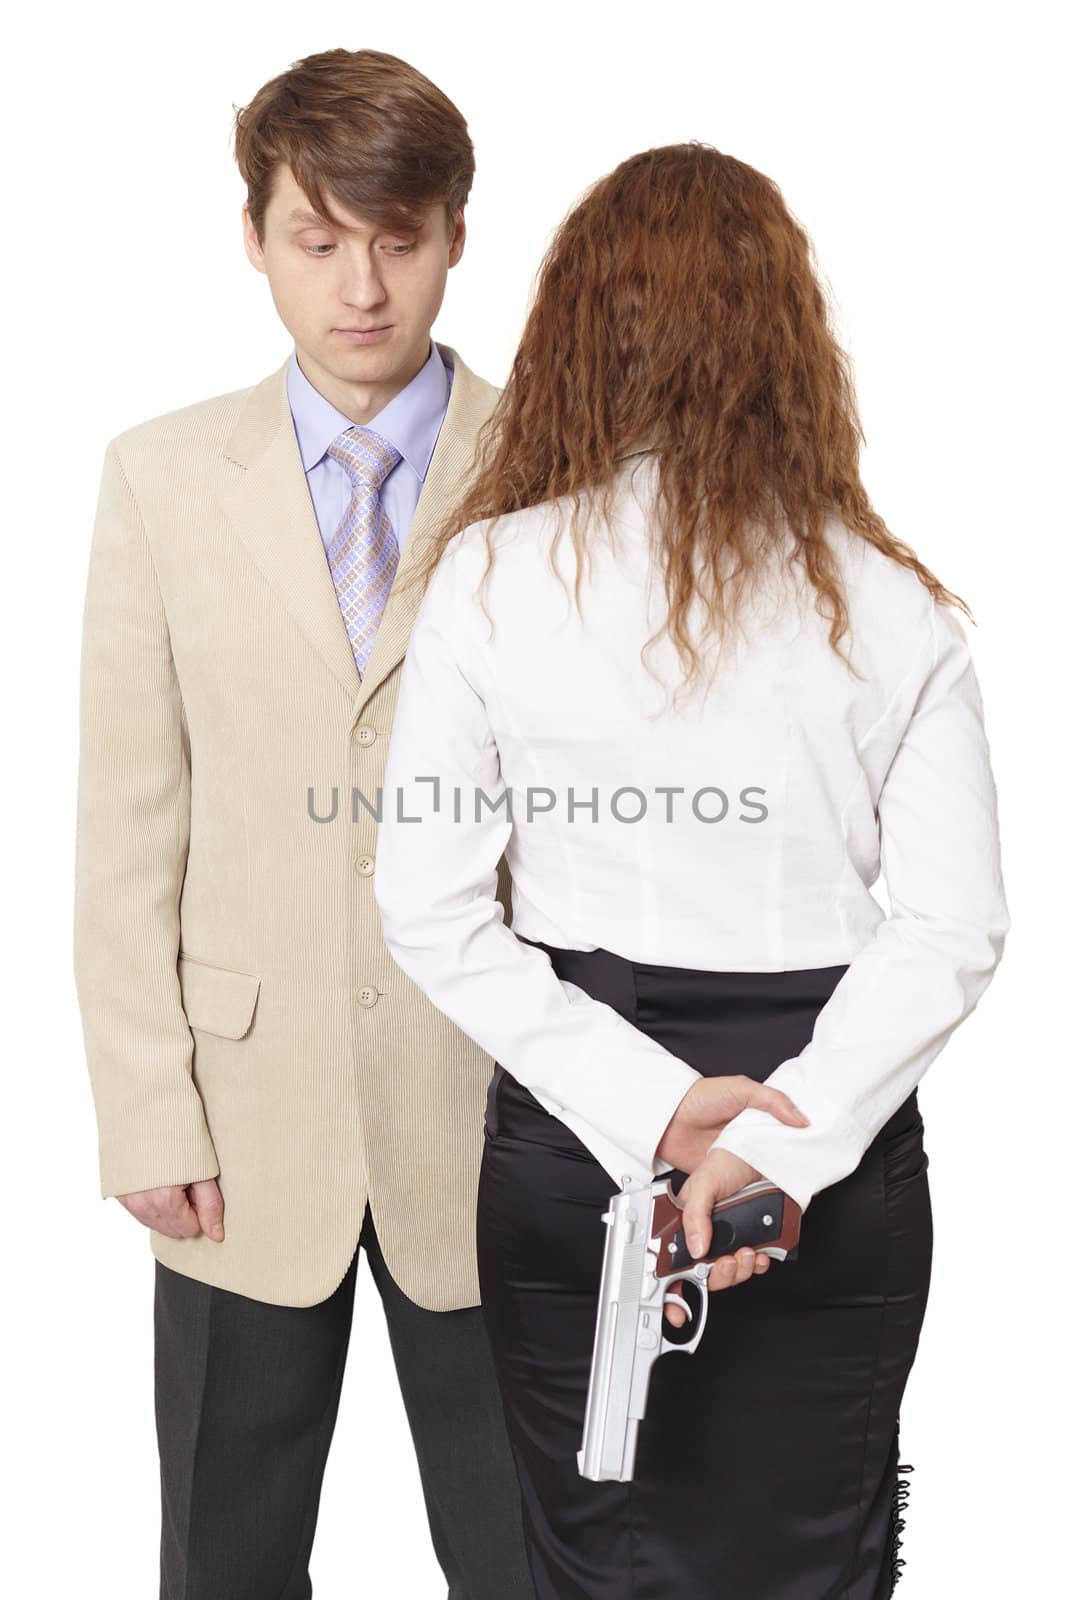 The young man and the woman armed with a pistol isolated on white